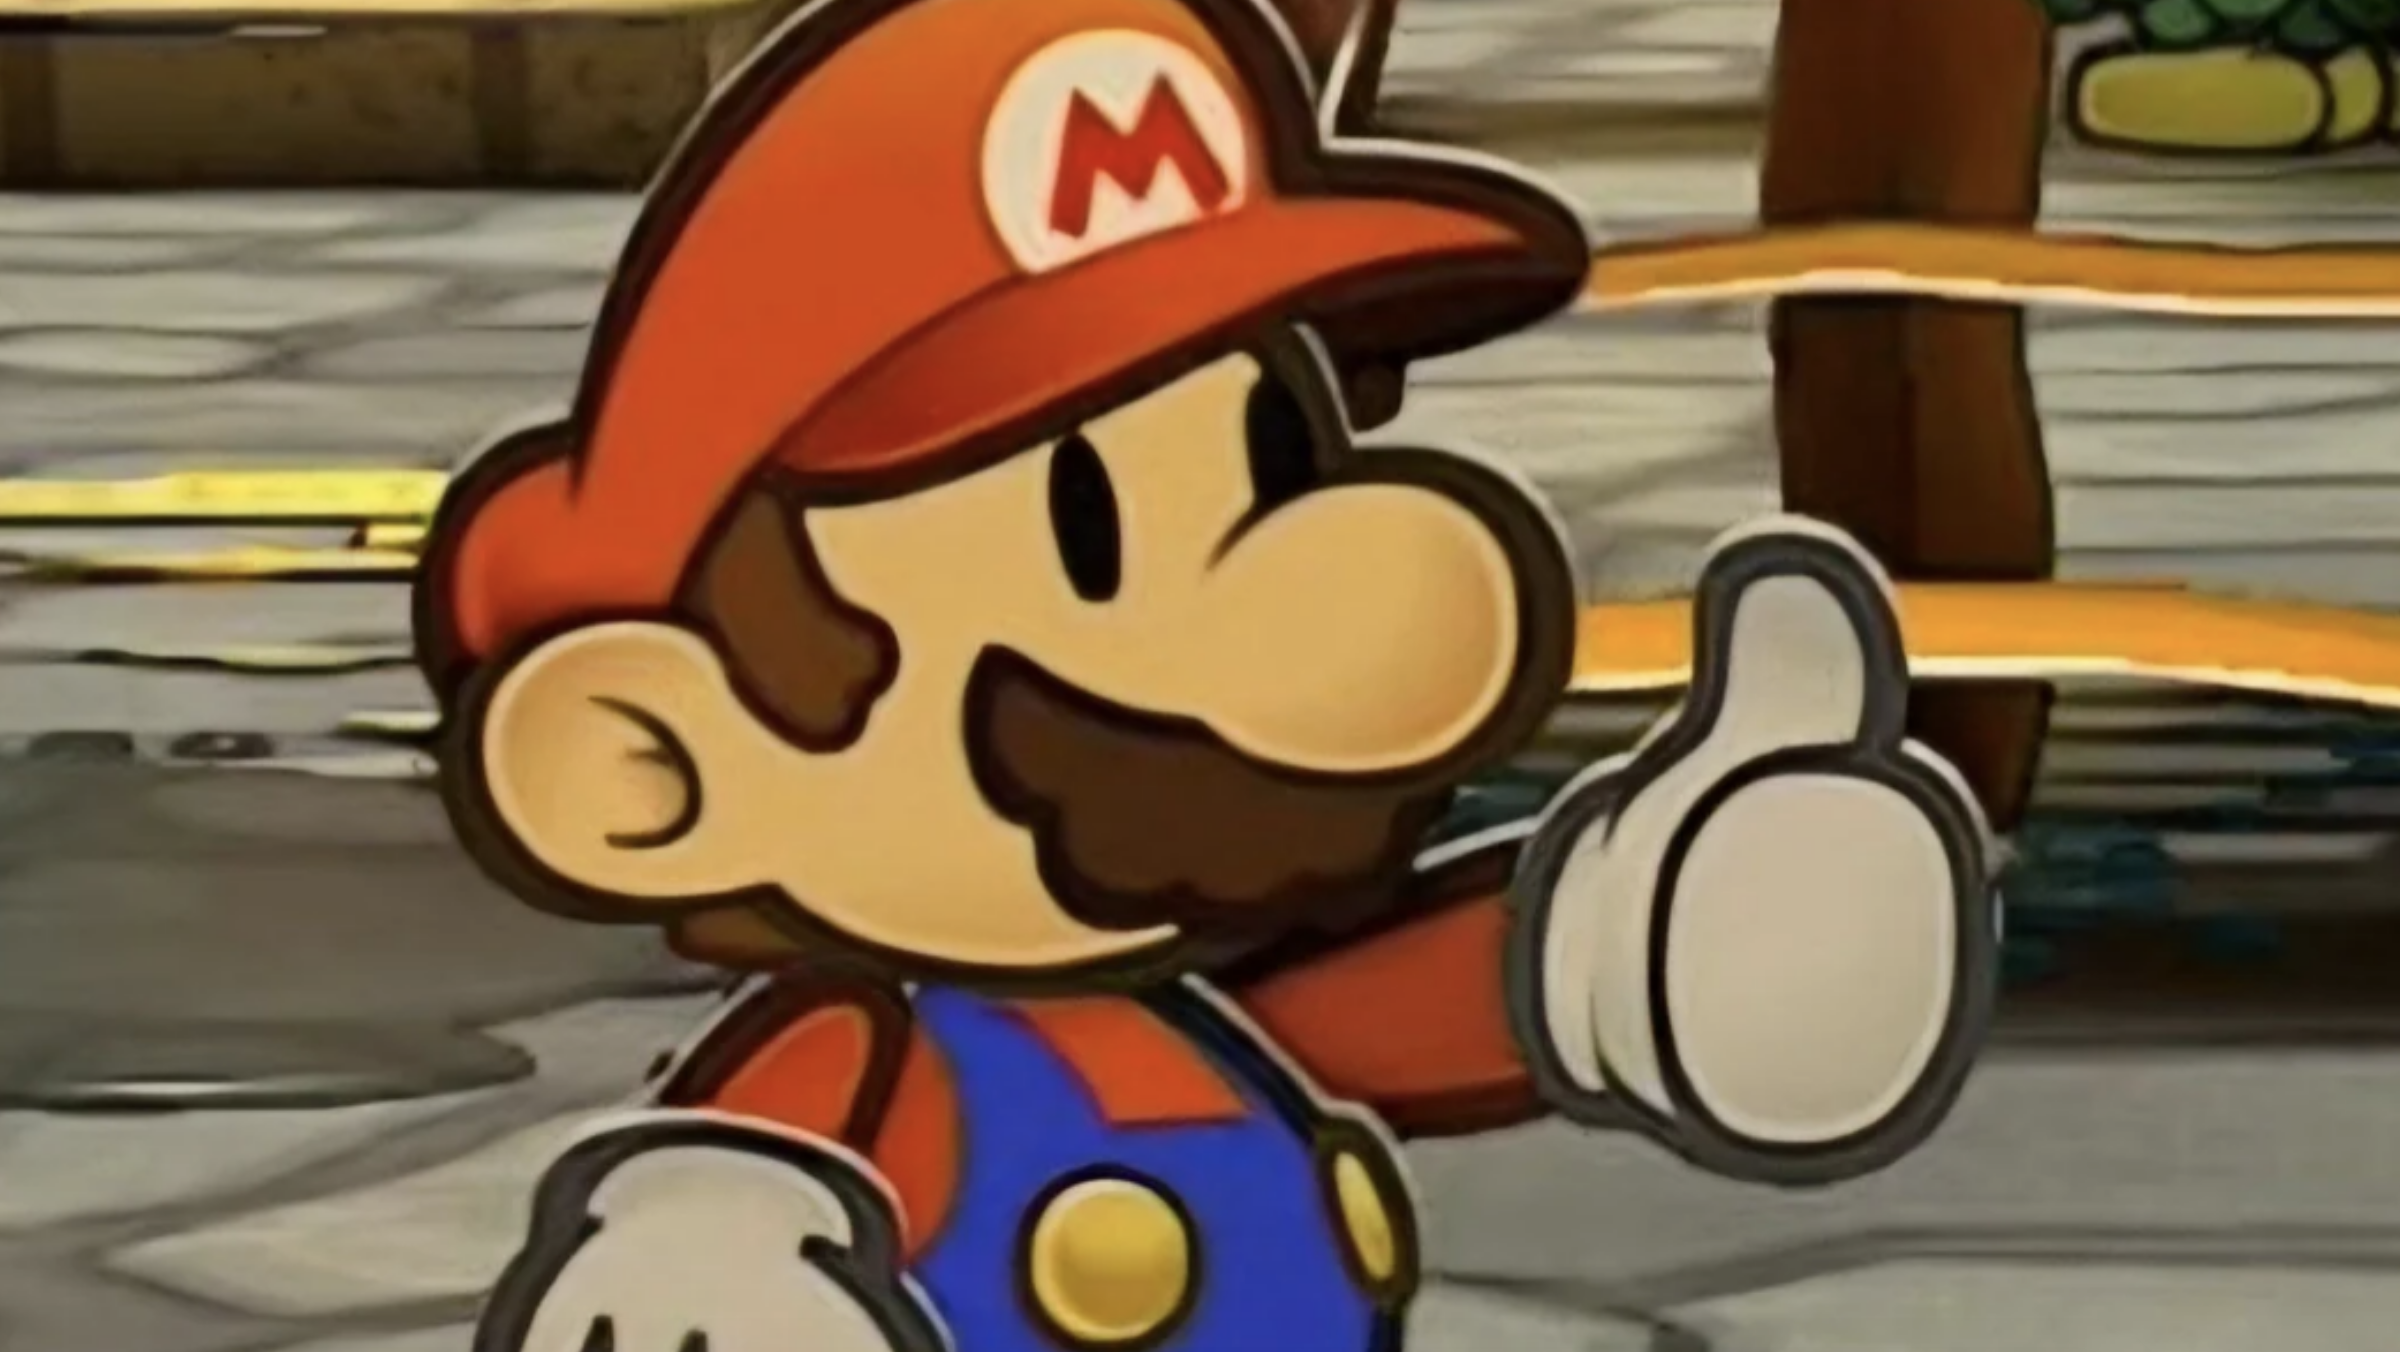 Paper Mario giving a thumbs up in Paper Mario: The Thousand Year Door